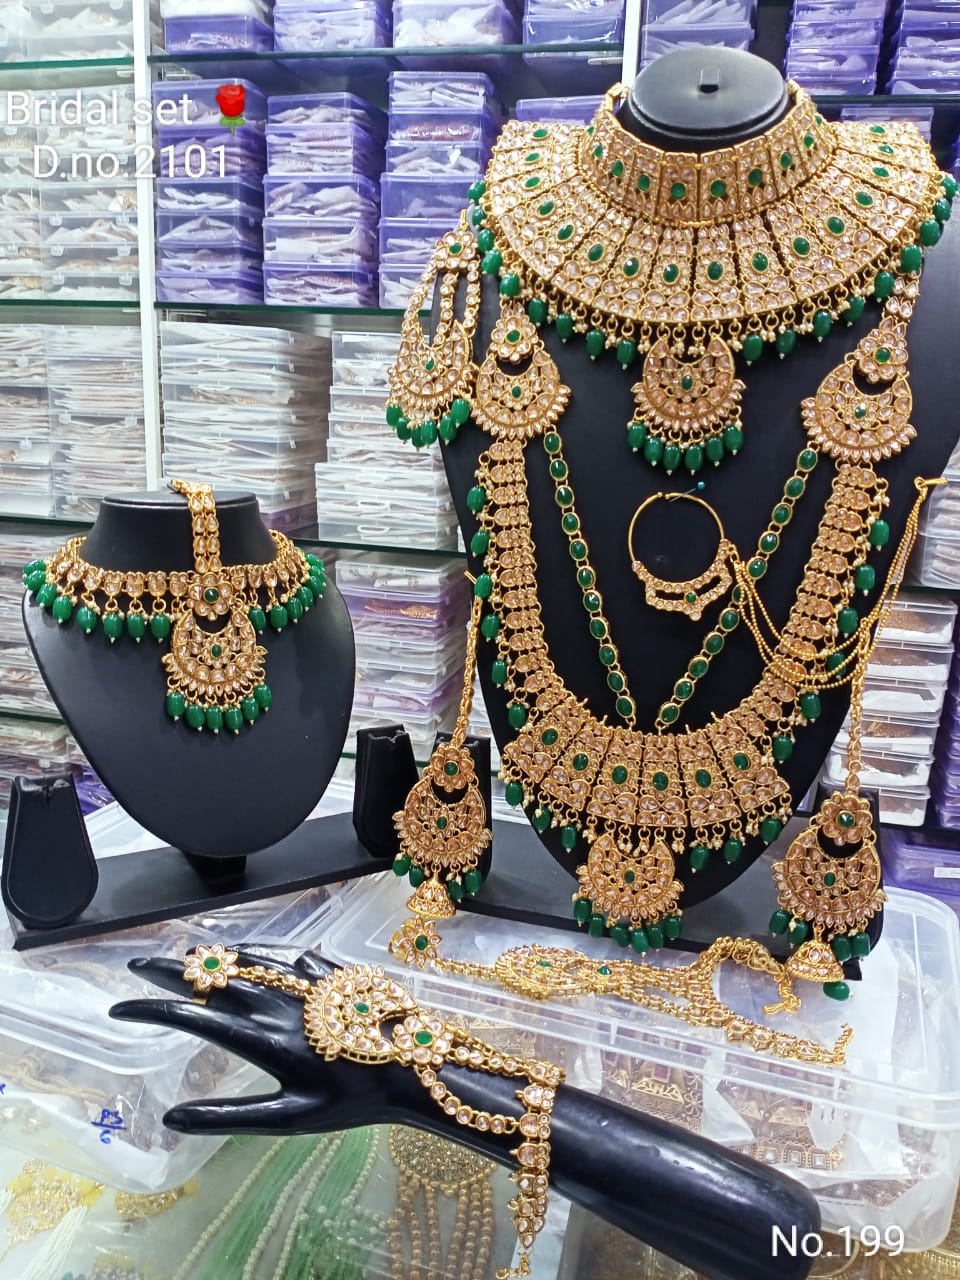 Jewellery brands tap the high-spend Indian bridal market | Vogue Business